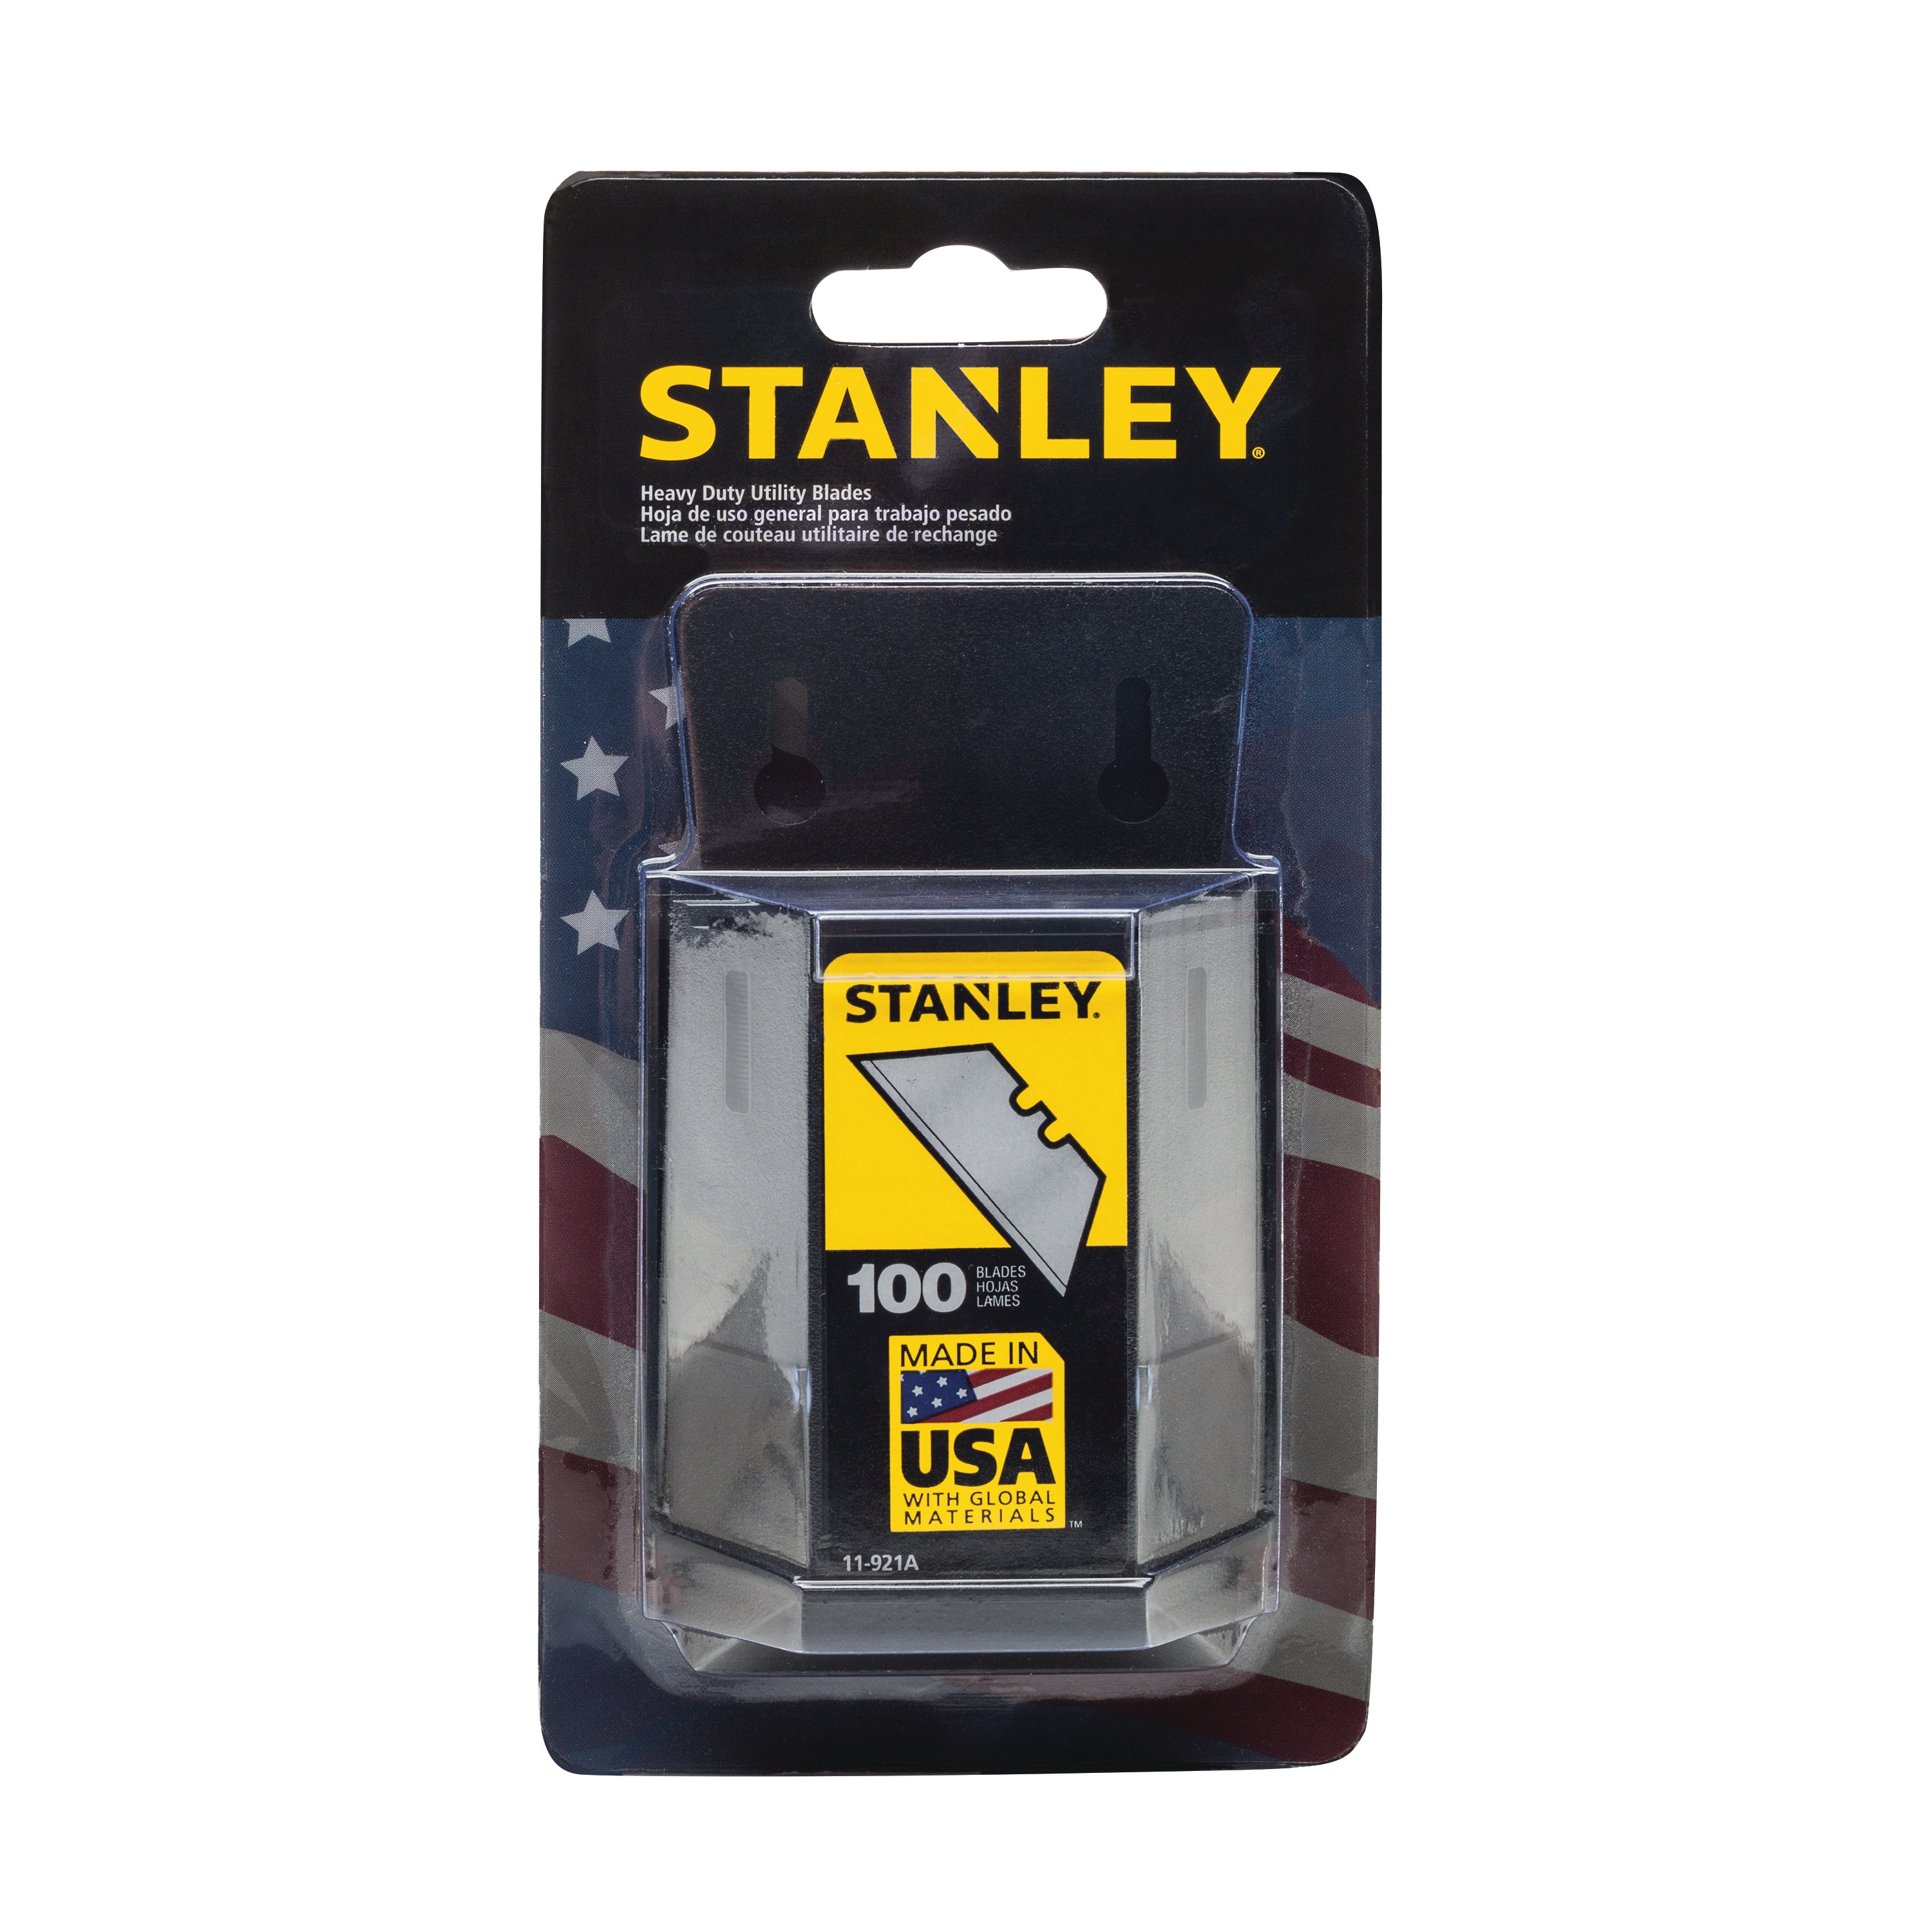 Stanley Tools - HeavyDuty Utility Blades with Dispenser 100 PK - 11-921A